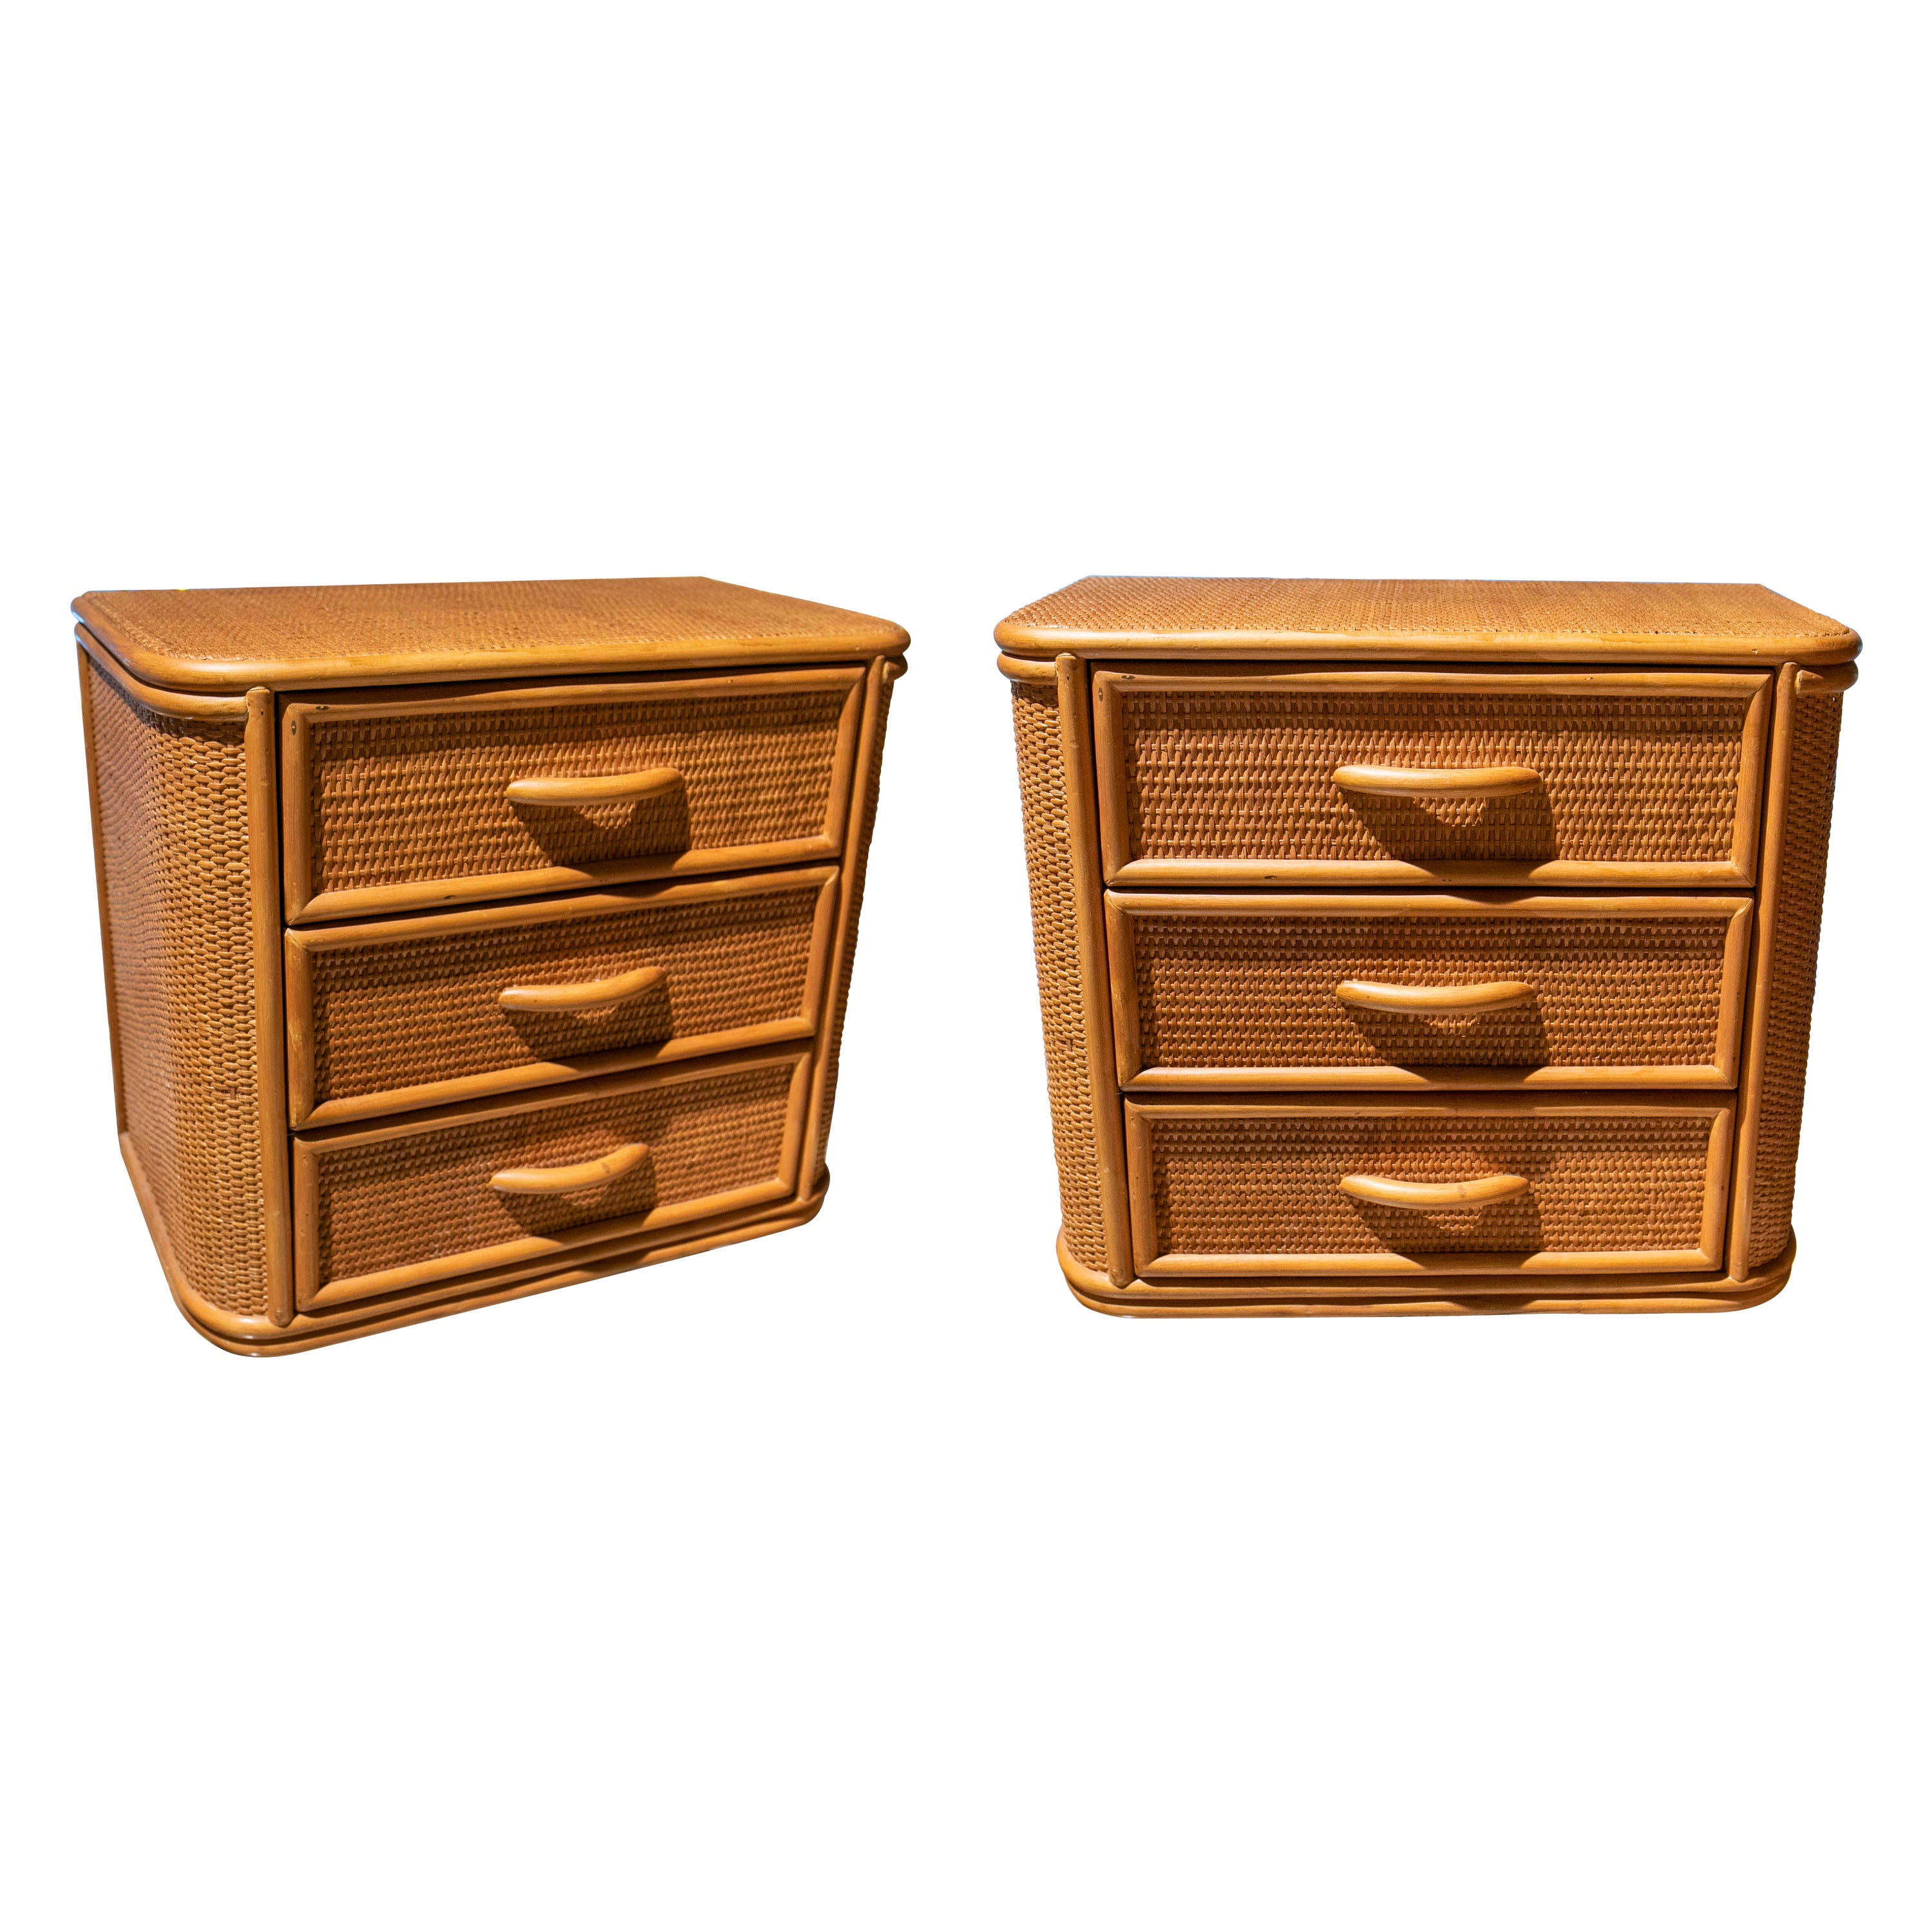 Pair of Bamboo and Wicker Bedside Tables with Three Drawers